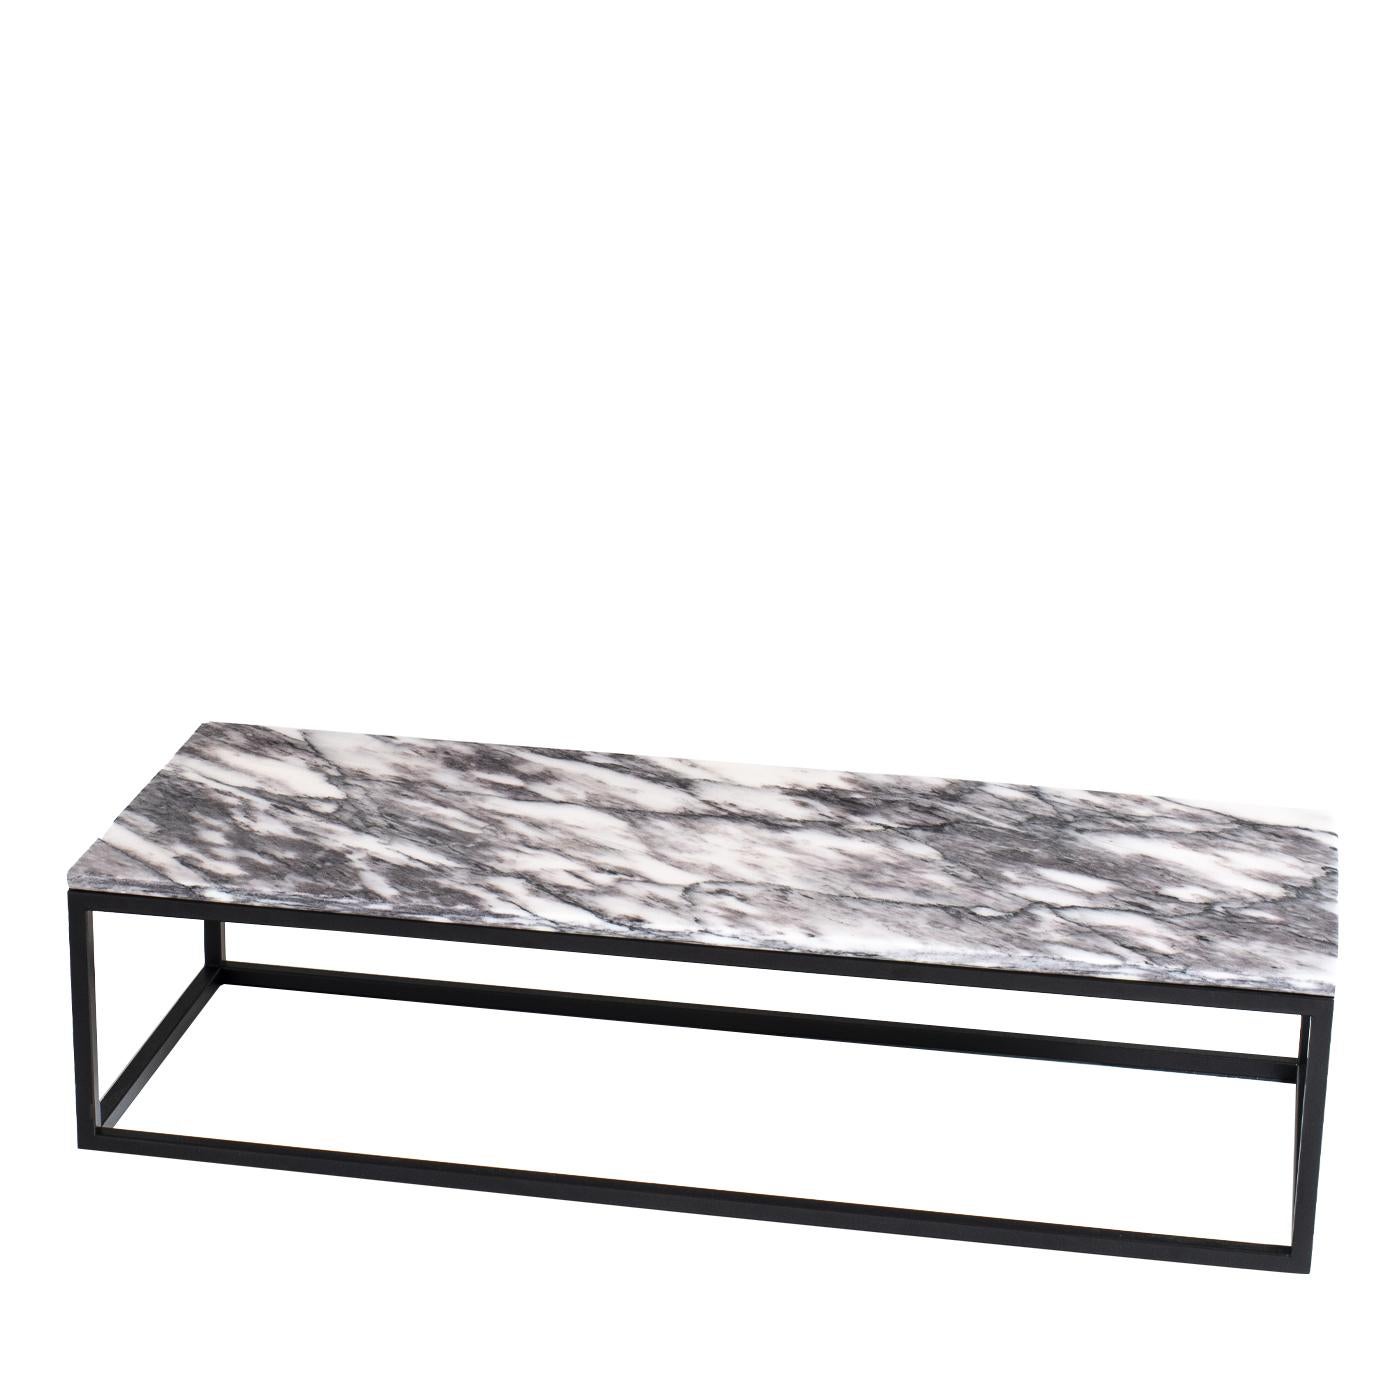 A simple design available in a wide variety of sizes, materials and finishes for endless combinations. Completely personalizable, the chic contemporary coffee table can be topped with glass, marble and more to fit seamlessly with the rest of your